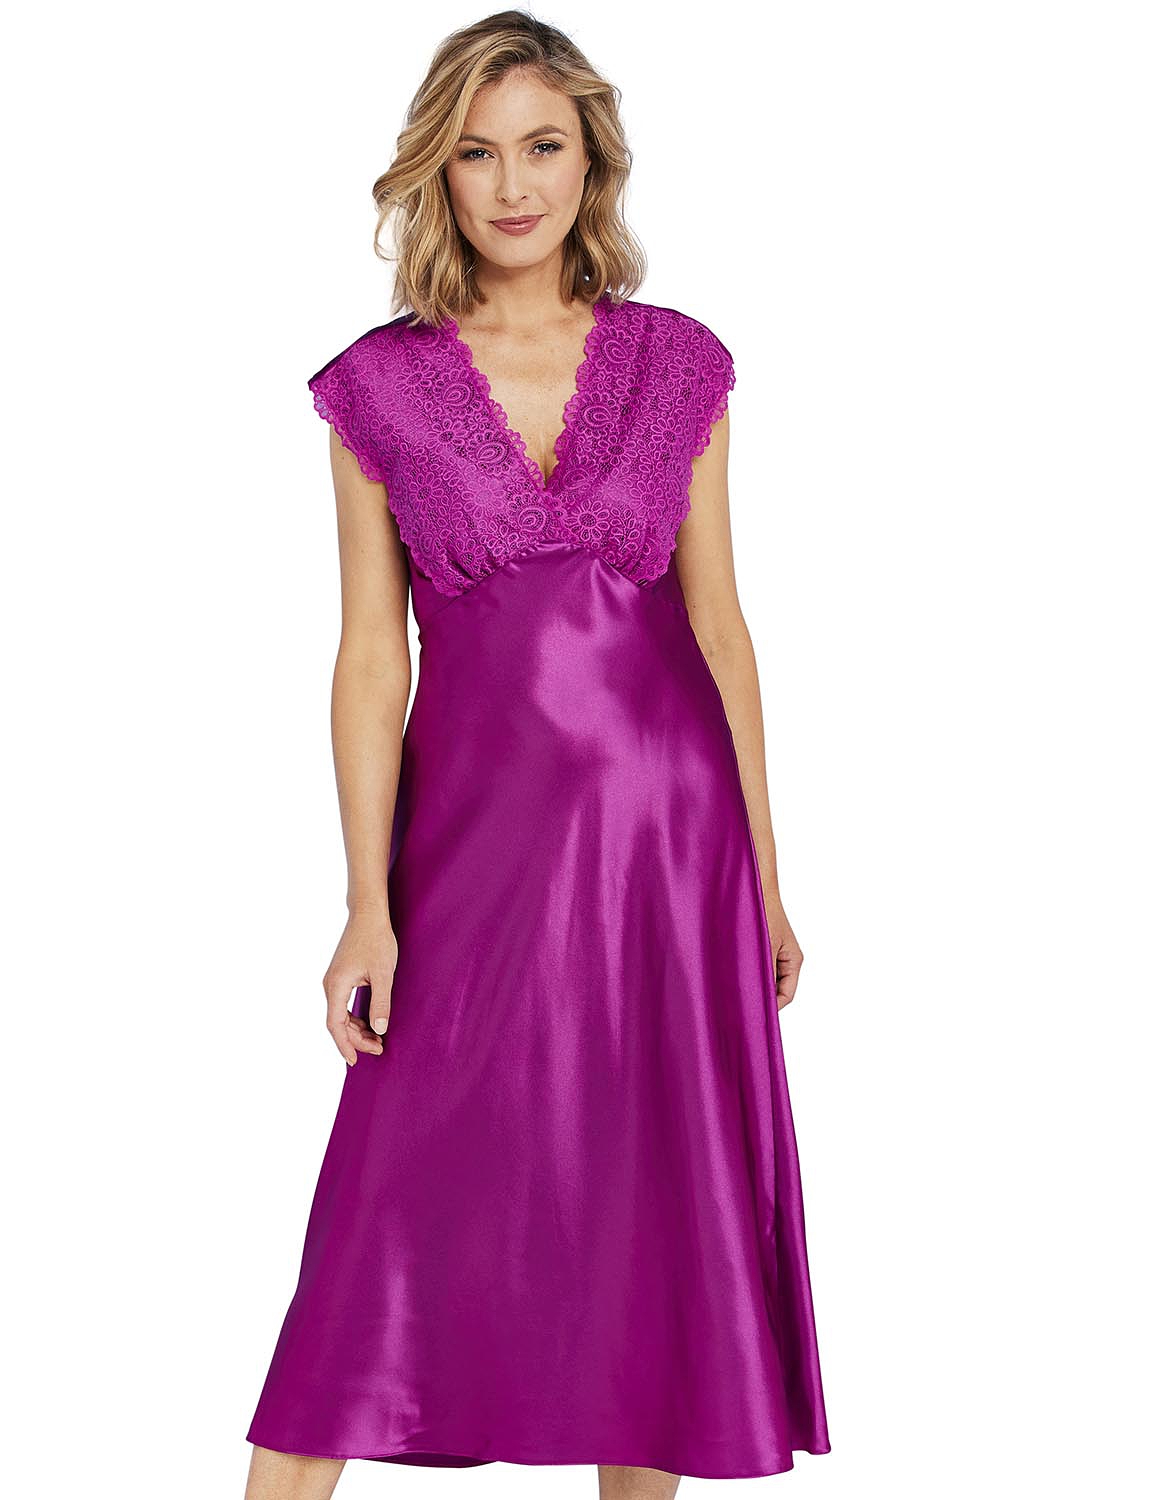 Luxury Satin and Lace Nightdress | Chums